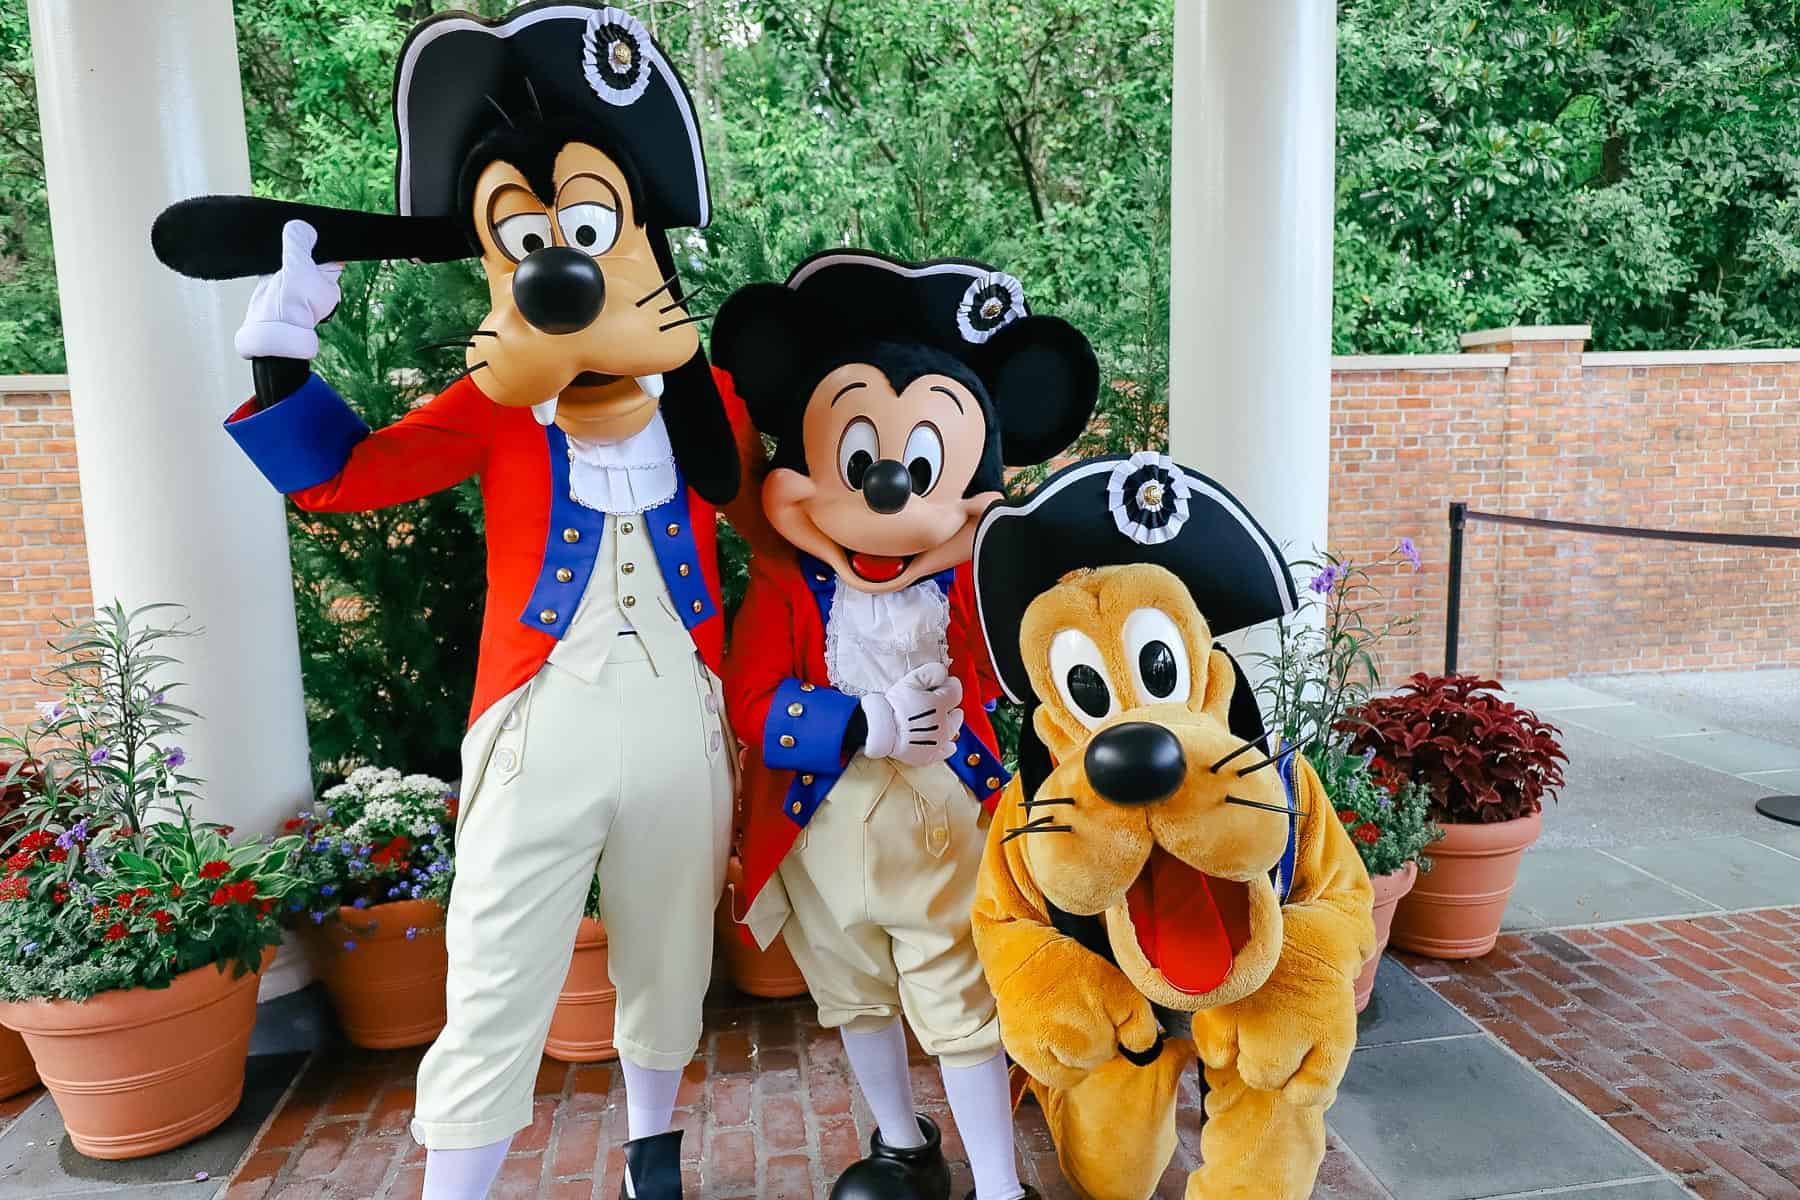 Mickey, Goofy, and Pluto in Patriotic uniforms for the 4th of July at Epcot 